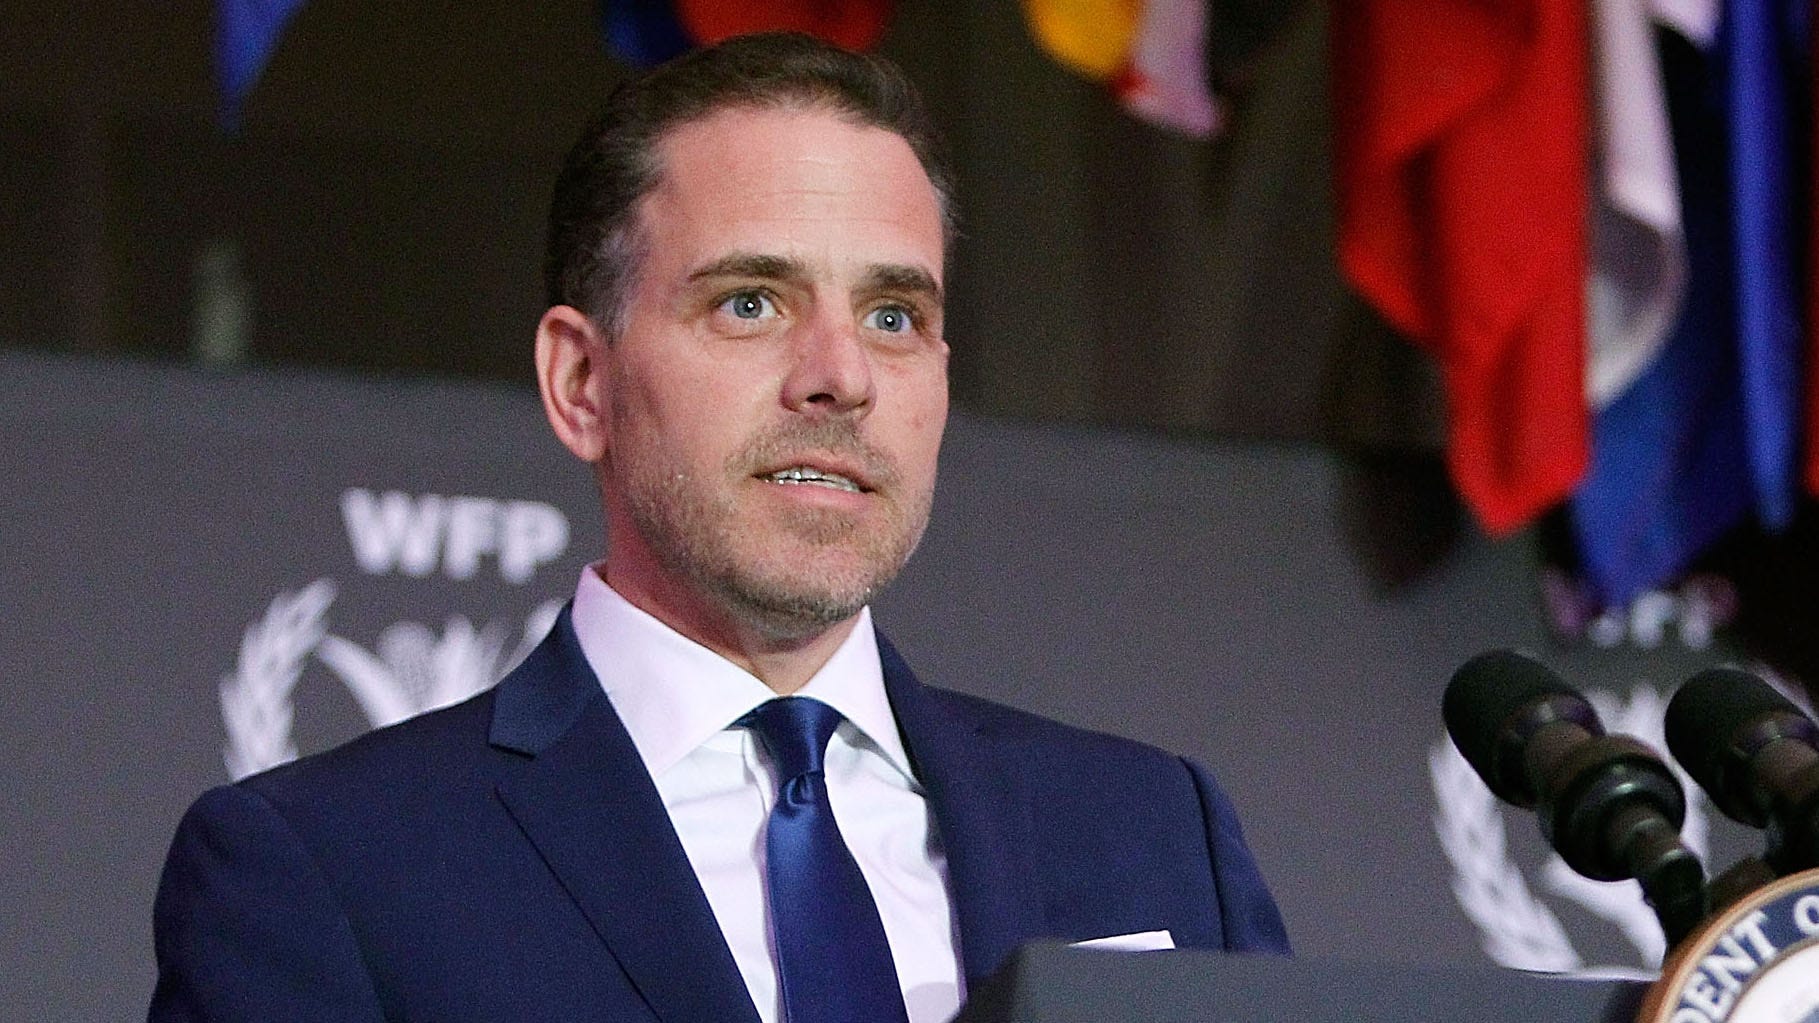 MSNBC buries NBC News report on Hunter Biden laptop, offers less than 4 minutes of coverage